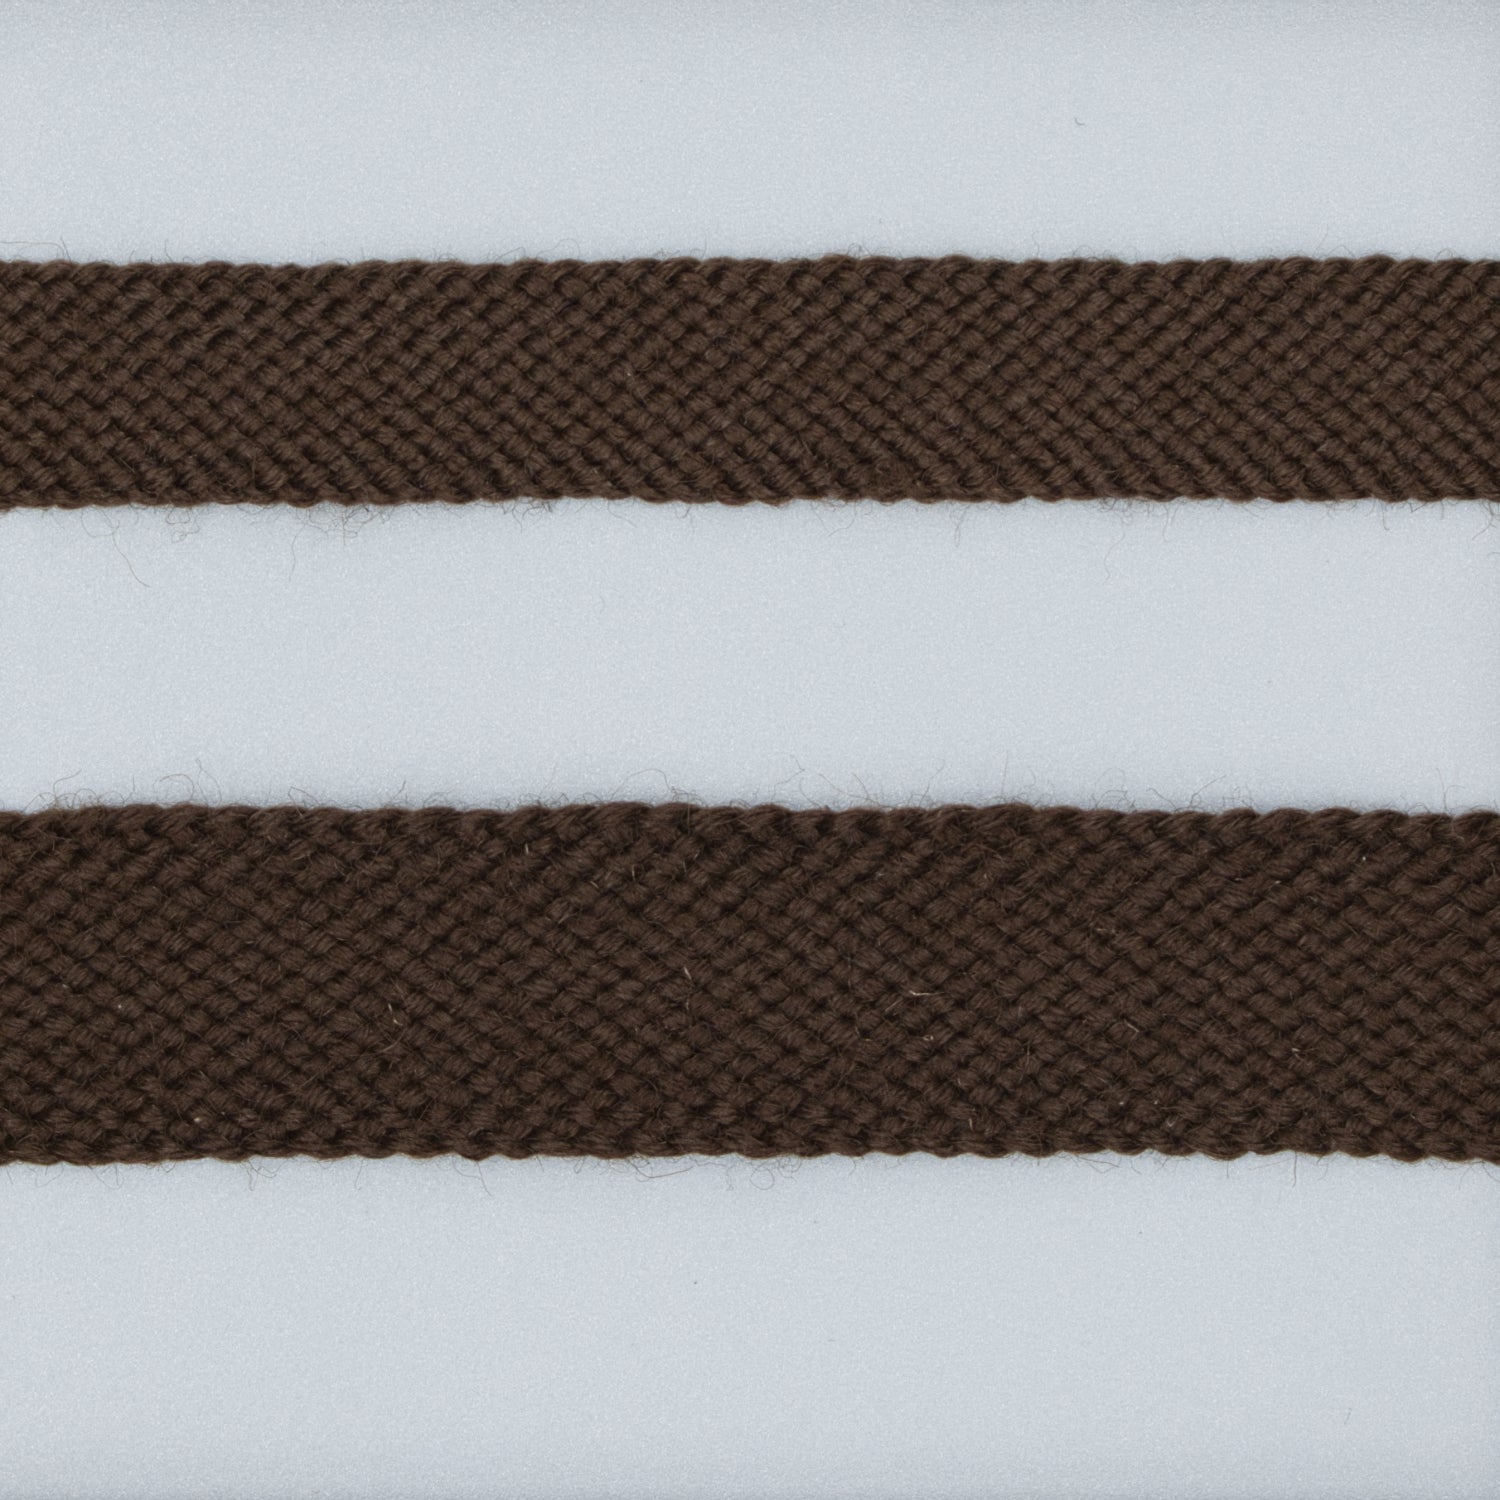 Wool Tape in brown 1/2 inch, 5/8 inch